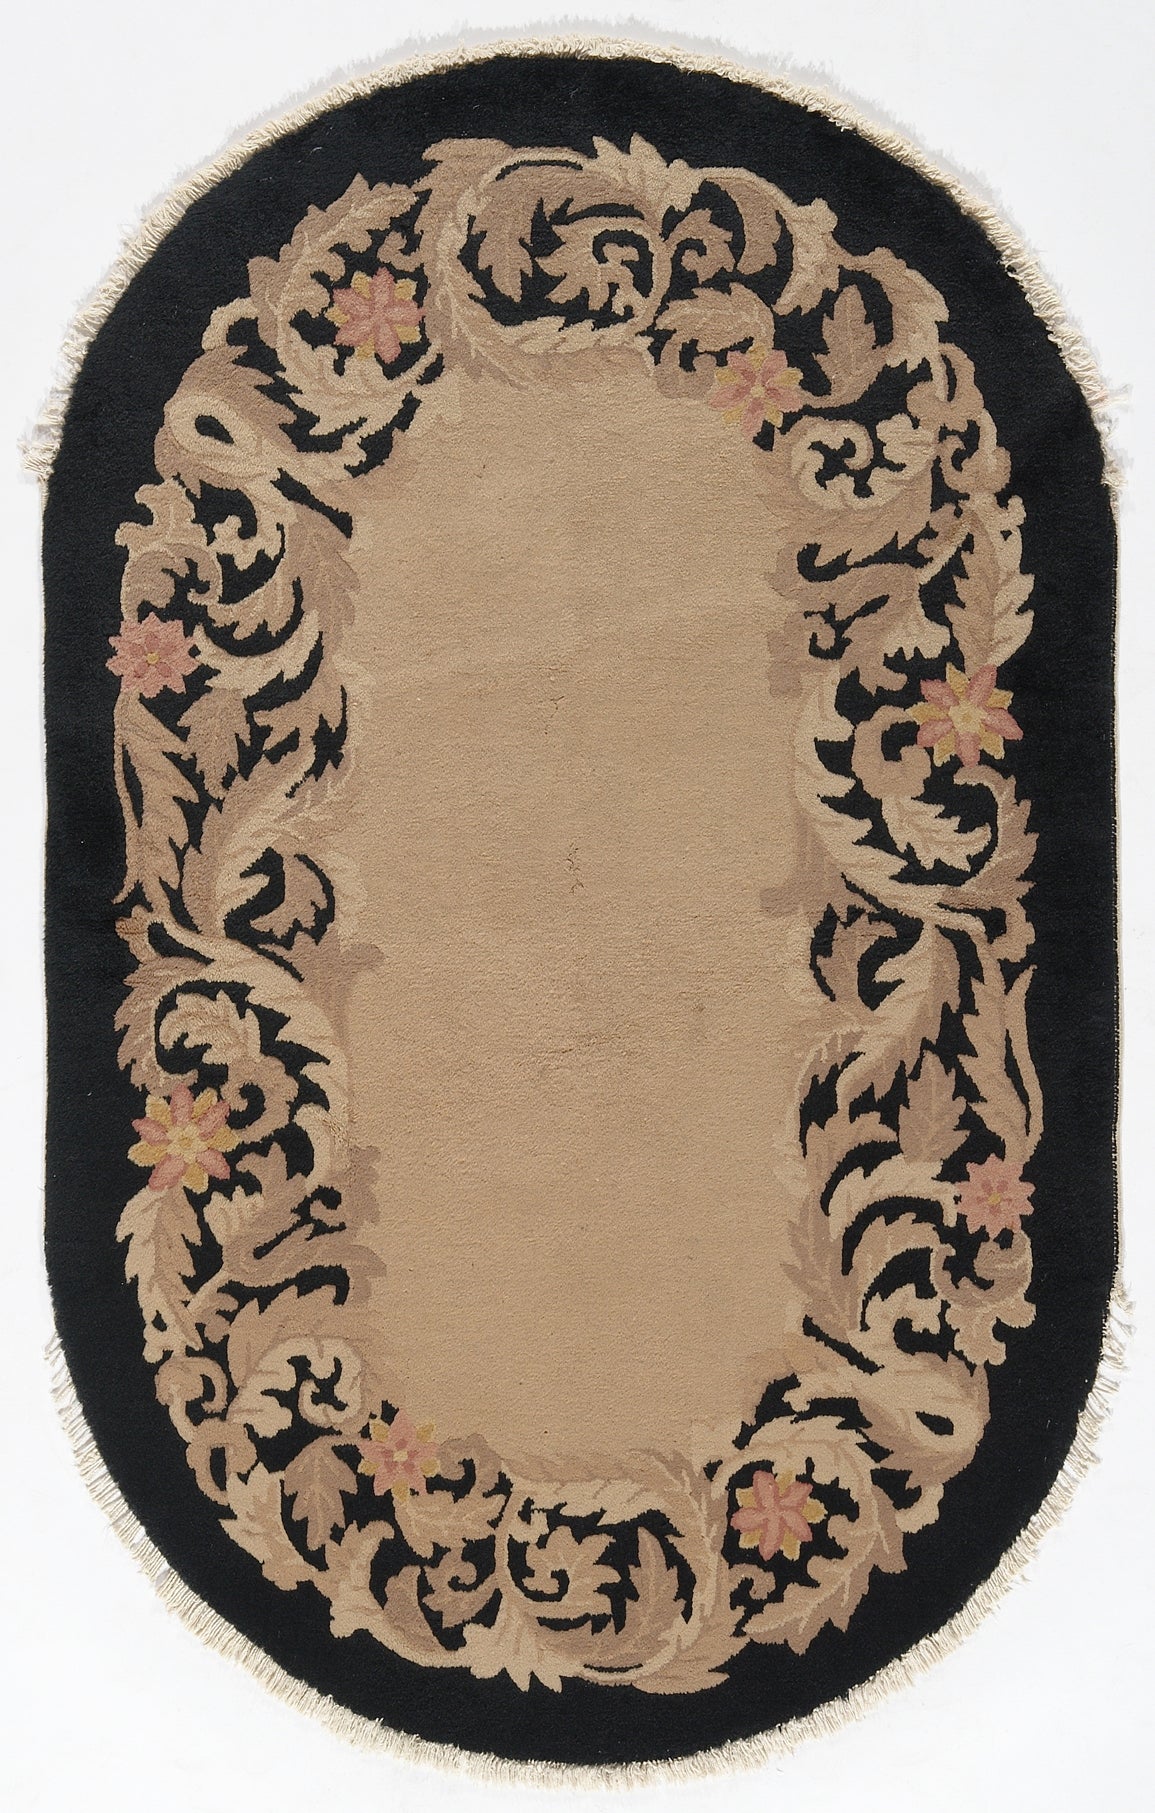 3'x5' Oval Black and Beige Chinese Art Deco Rug